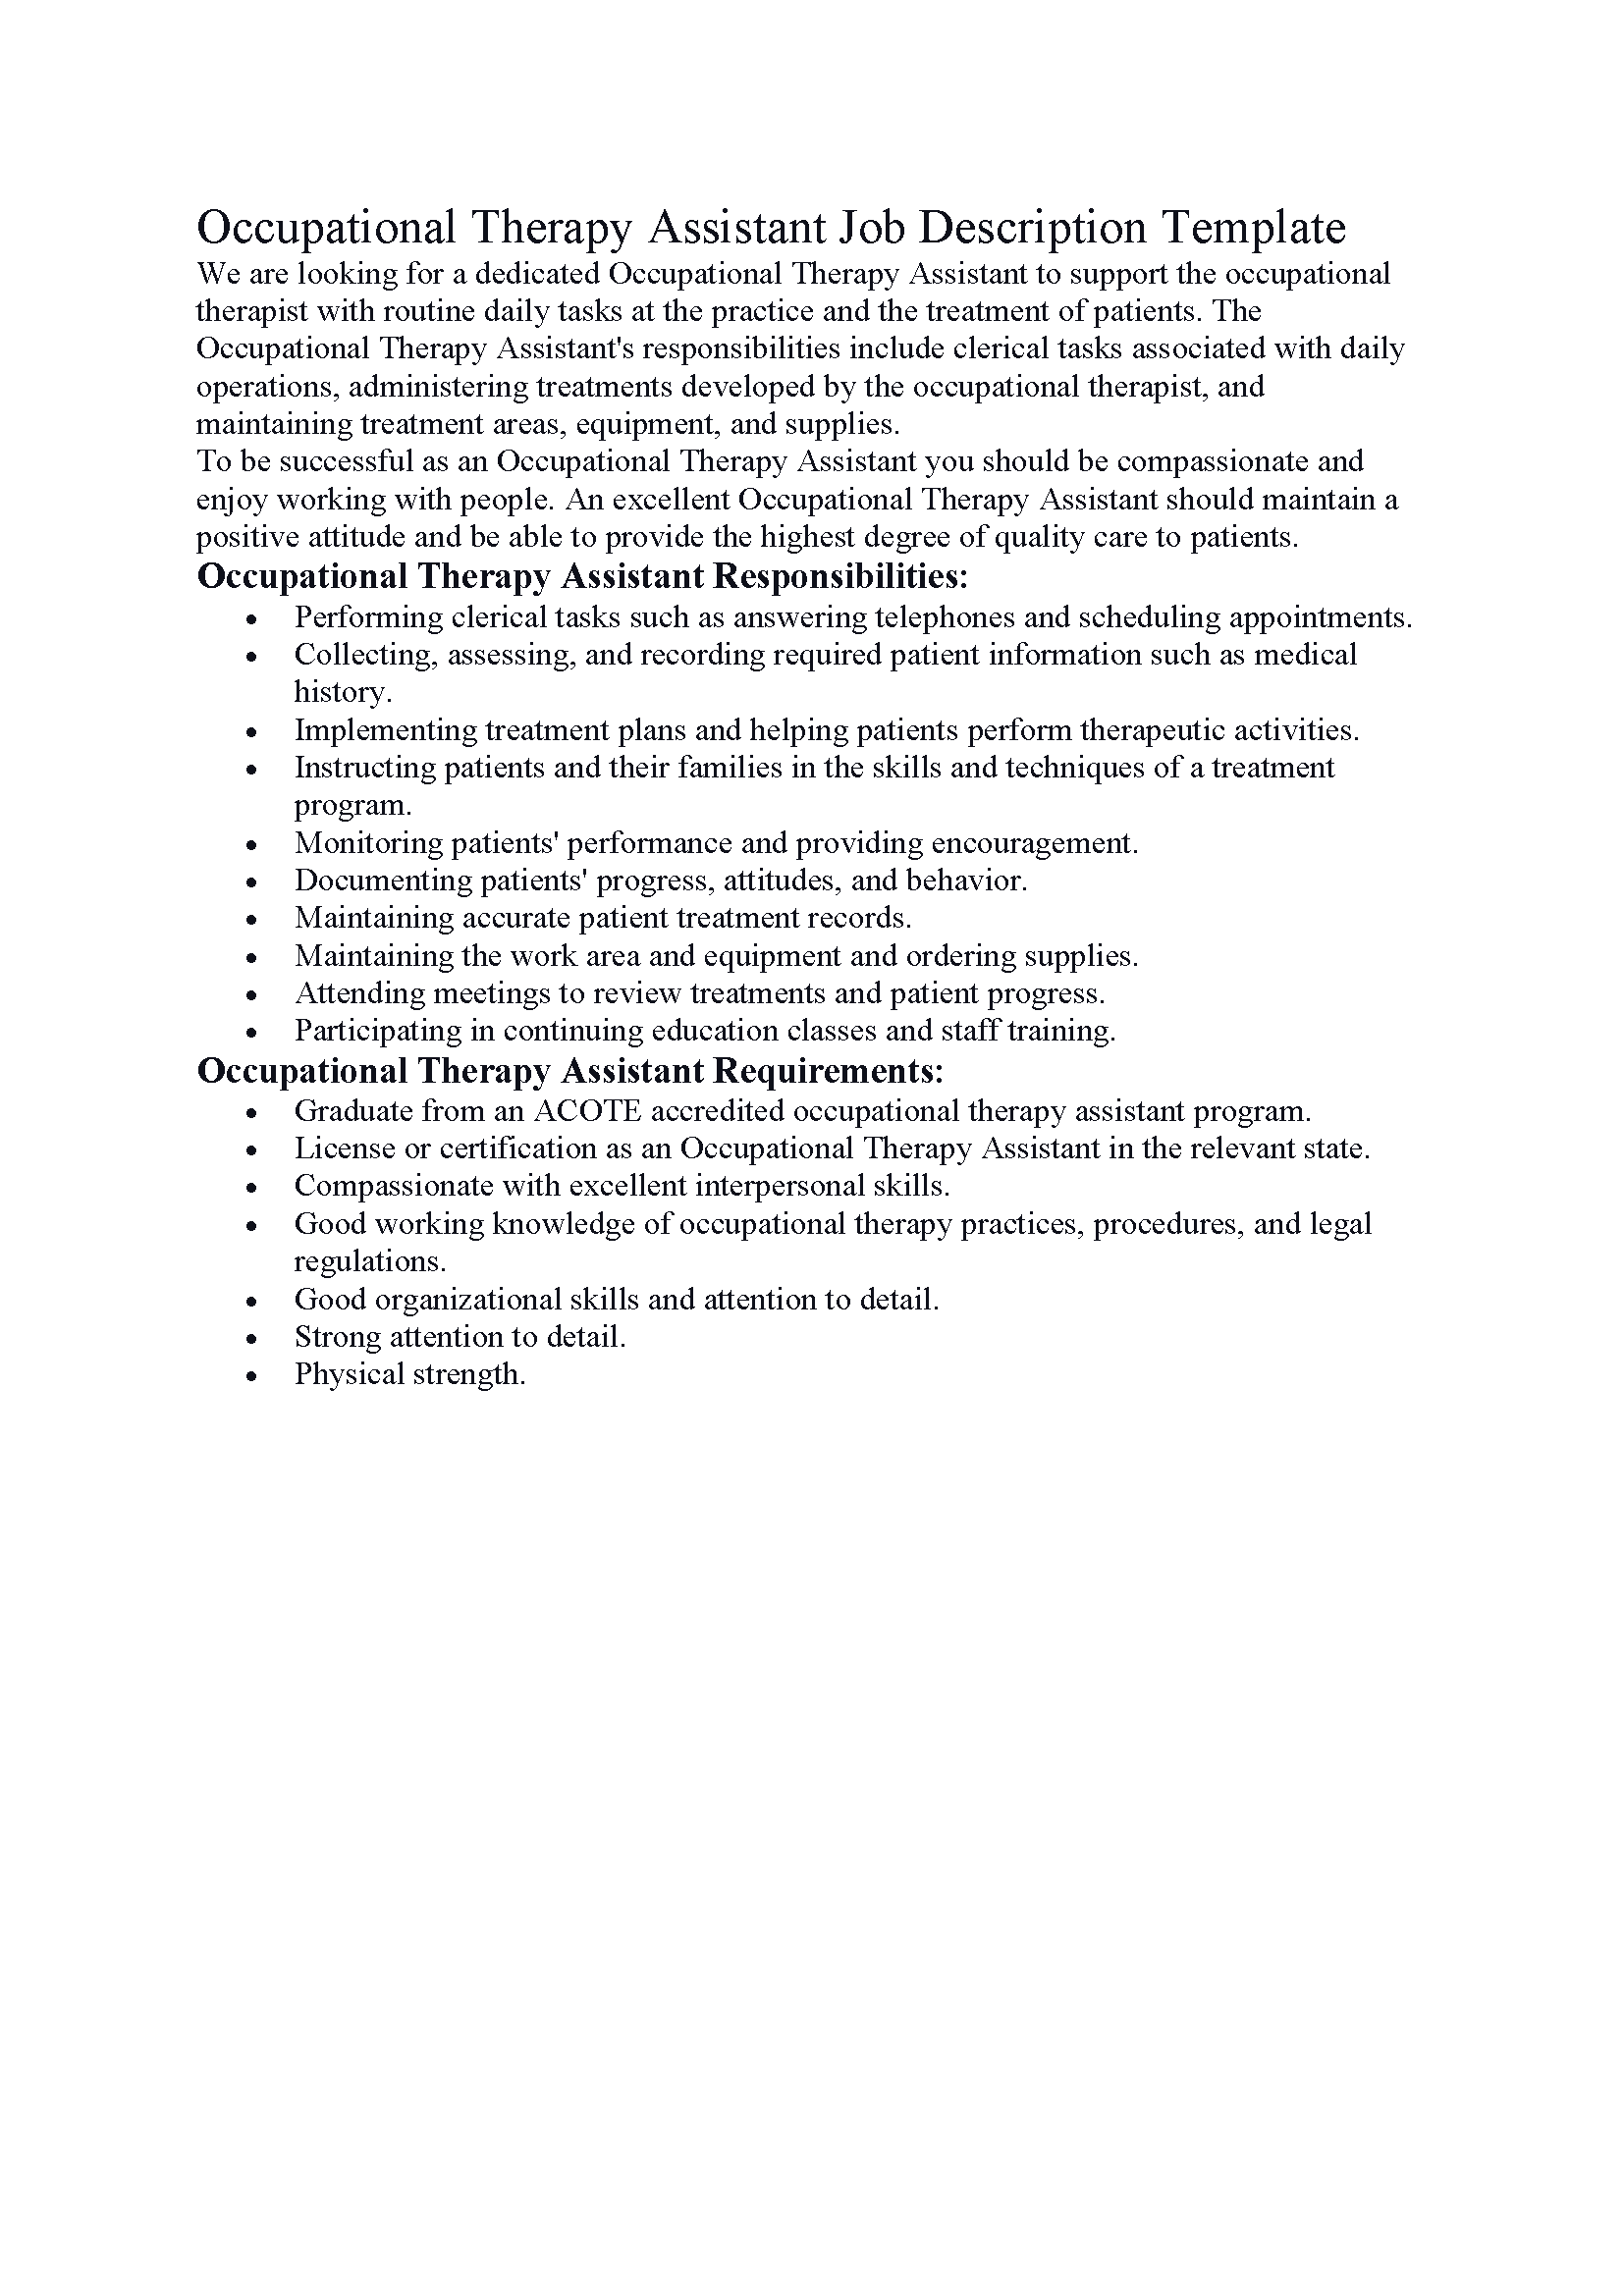 Occupational Therapy Assistant Job Description Template